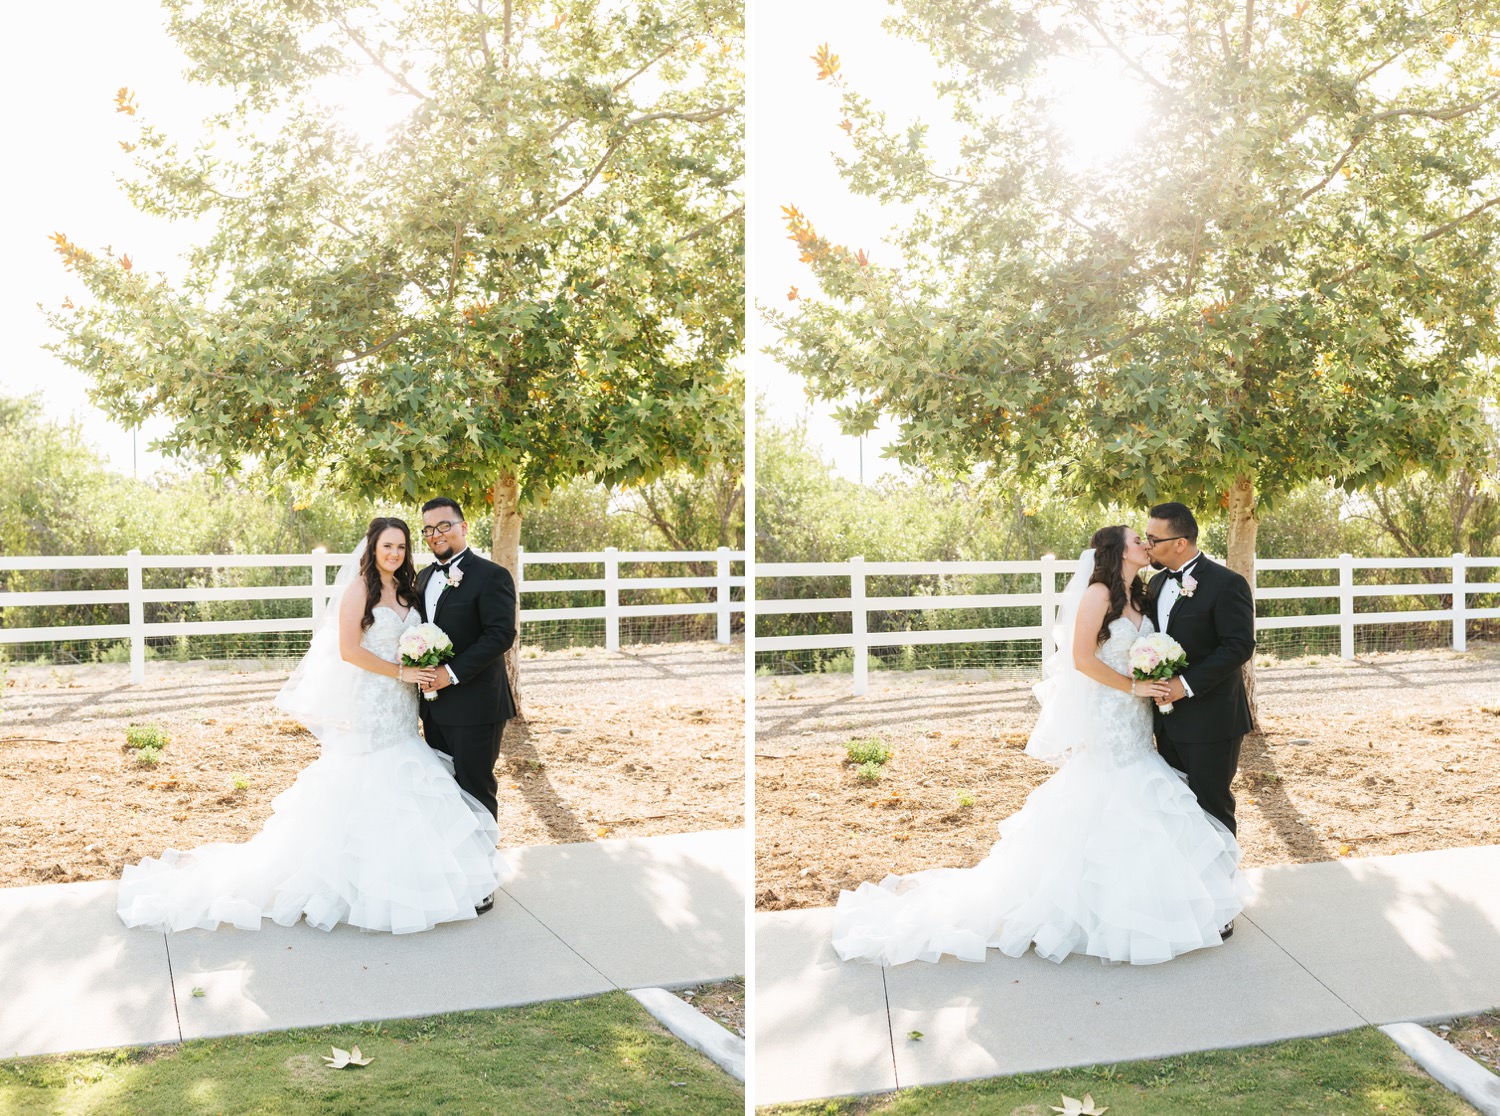 Romantic and Natural Light Bride and Groom Photos - https://brittneyhannonphotography.com